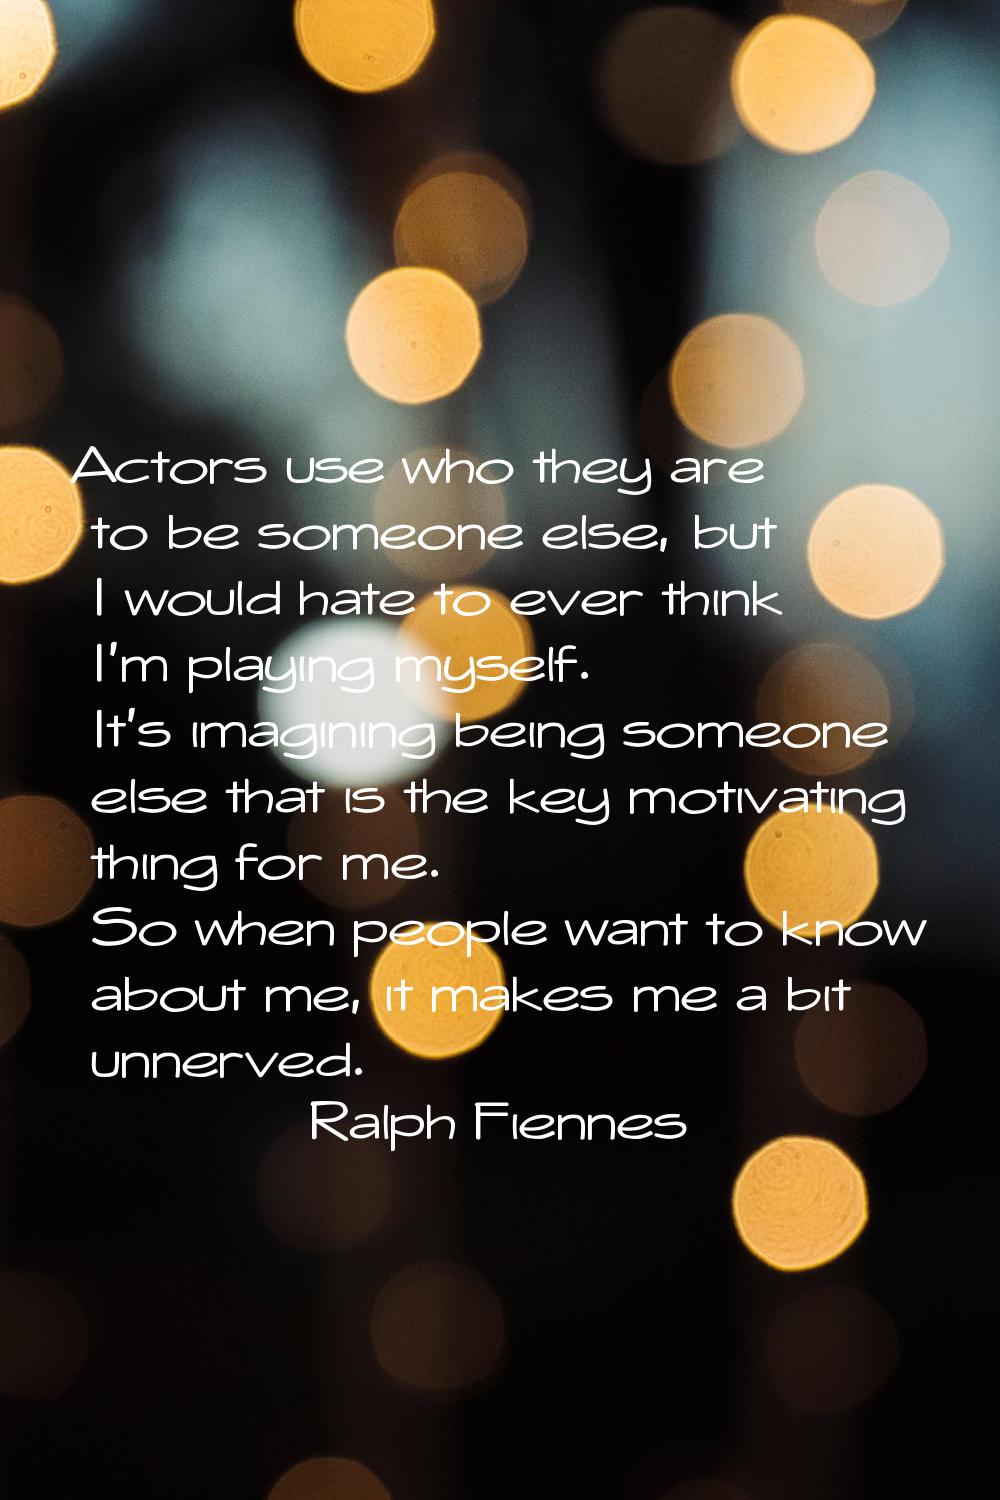 Actors use who they are to be someone else, but I would hate to ever think I'm playing myself. It's